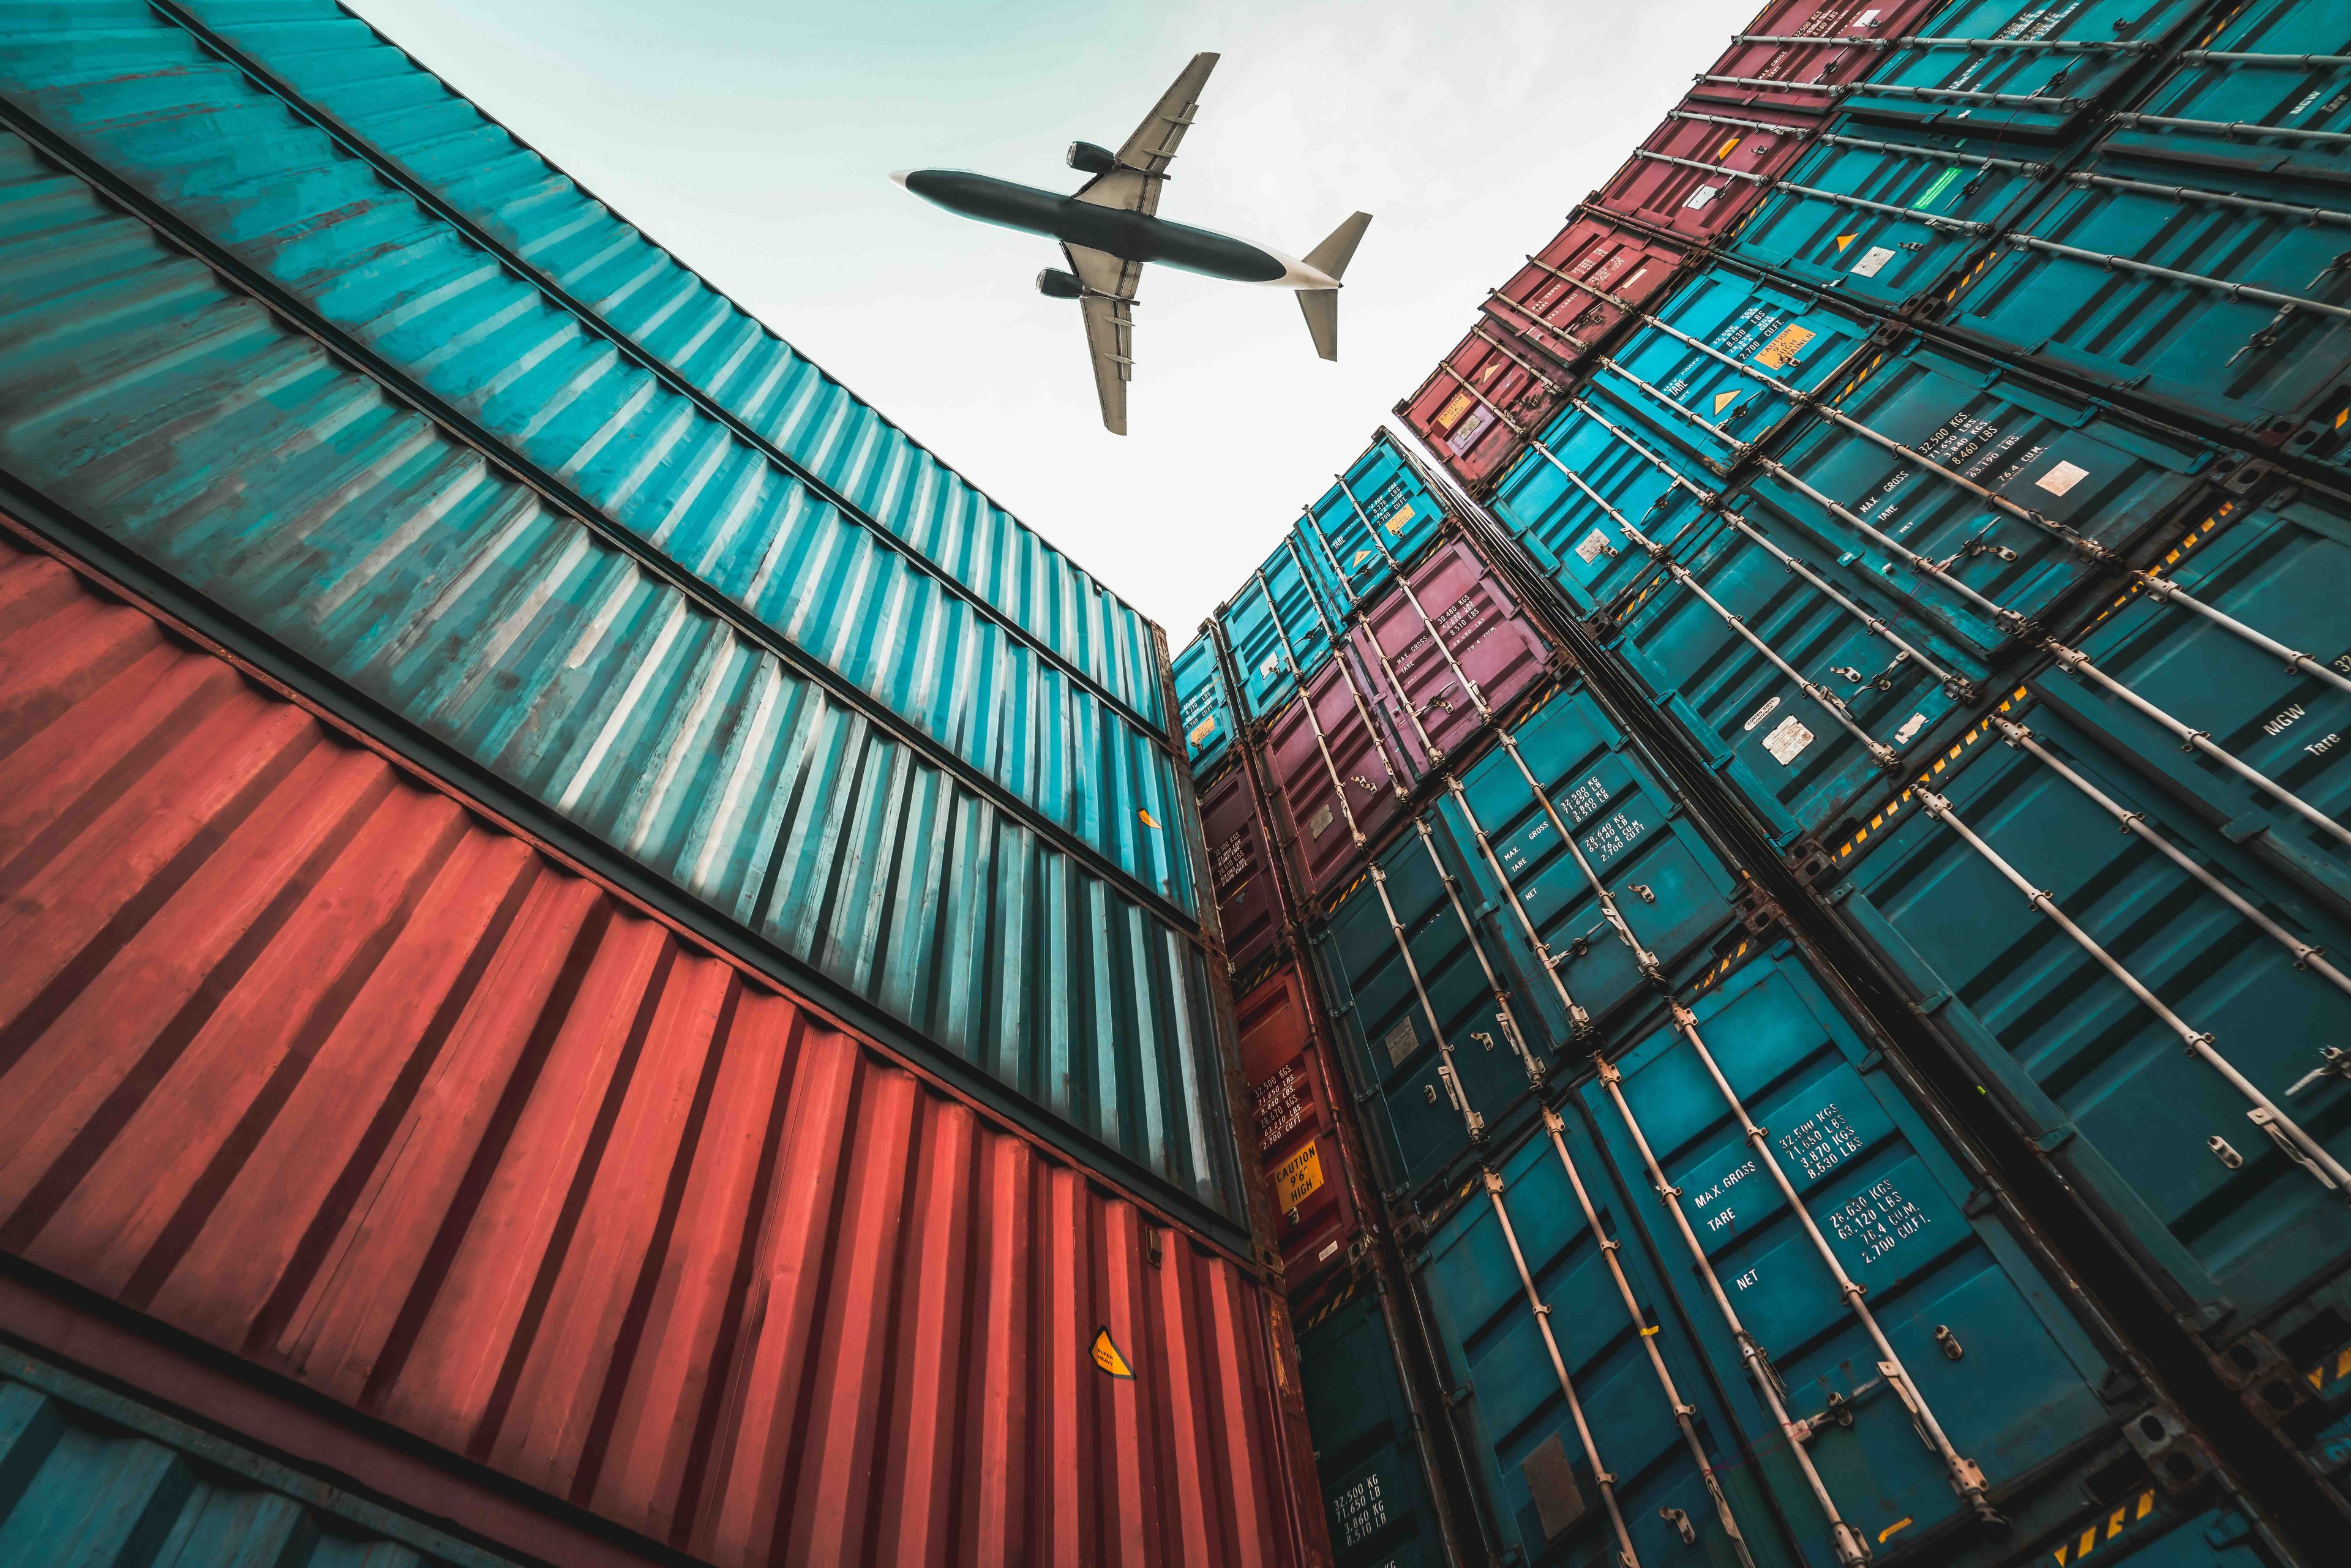 Plane and Containers